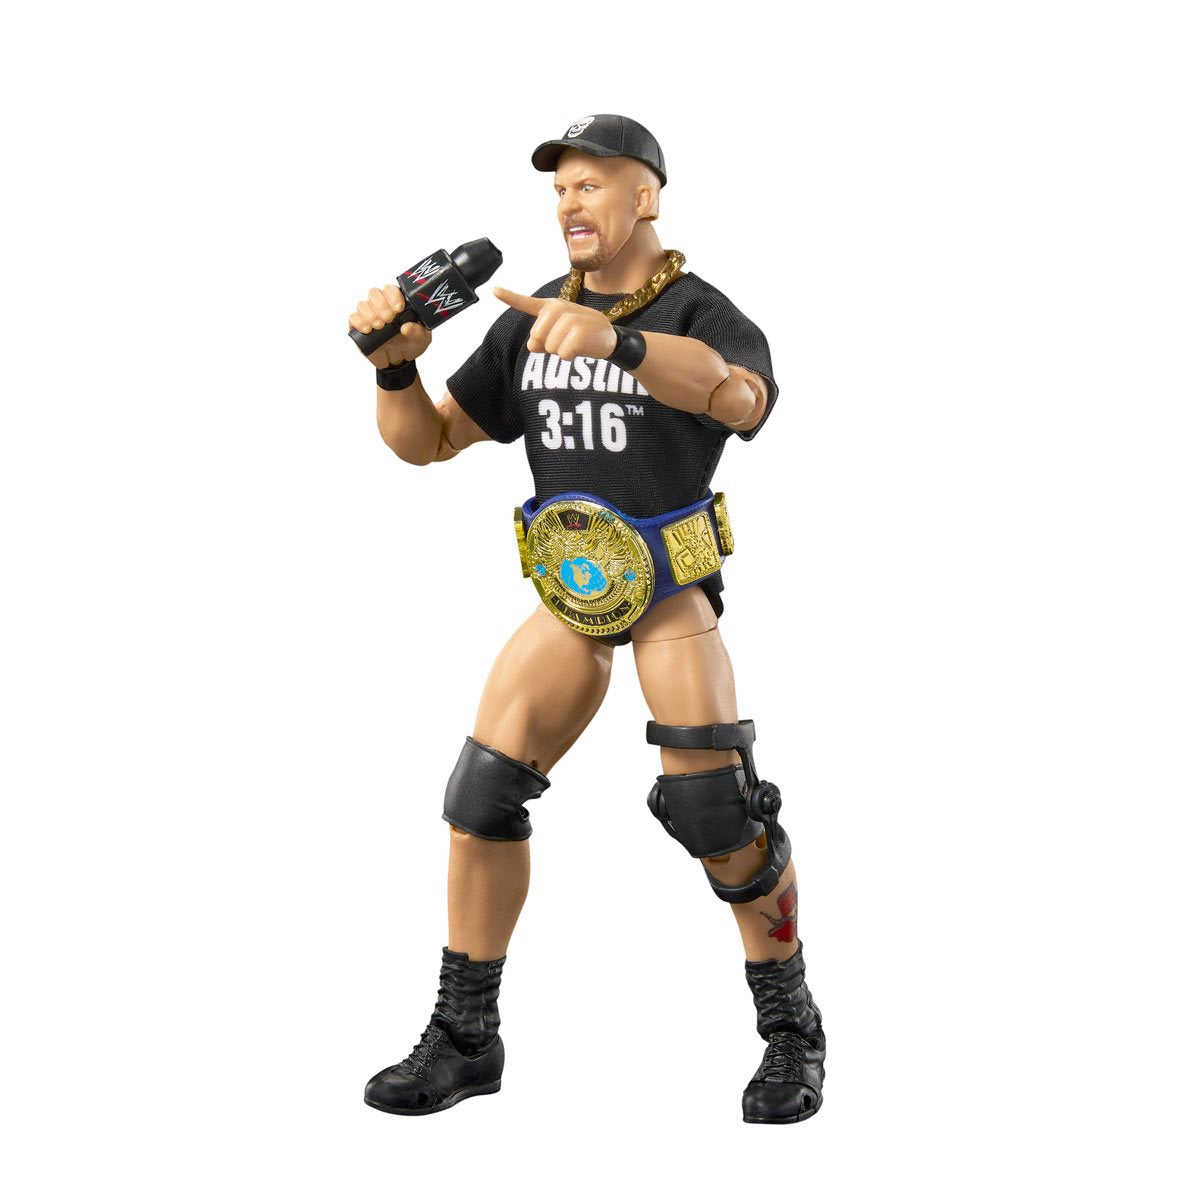 WWE Ultimate Edition Best Of Wave 2 Stone Cold Steve Austin